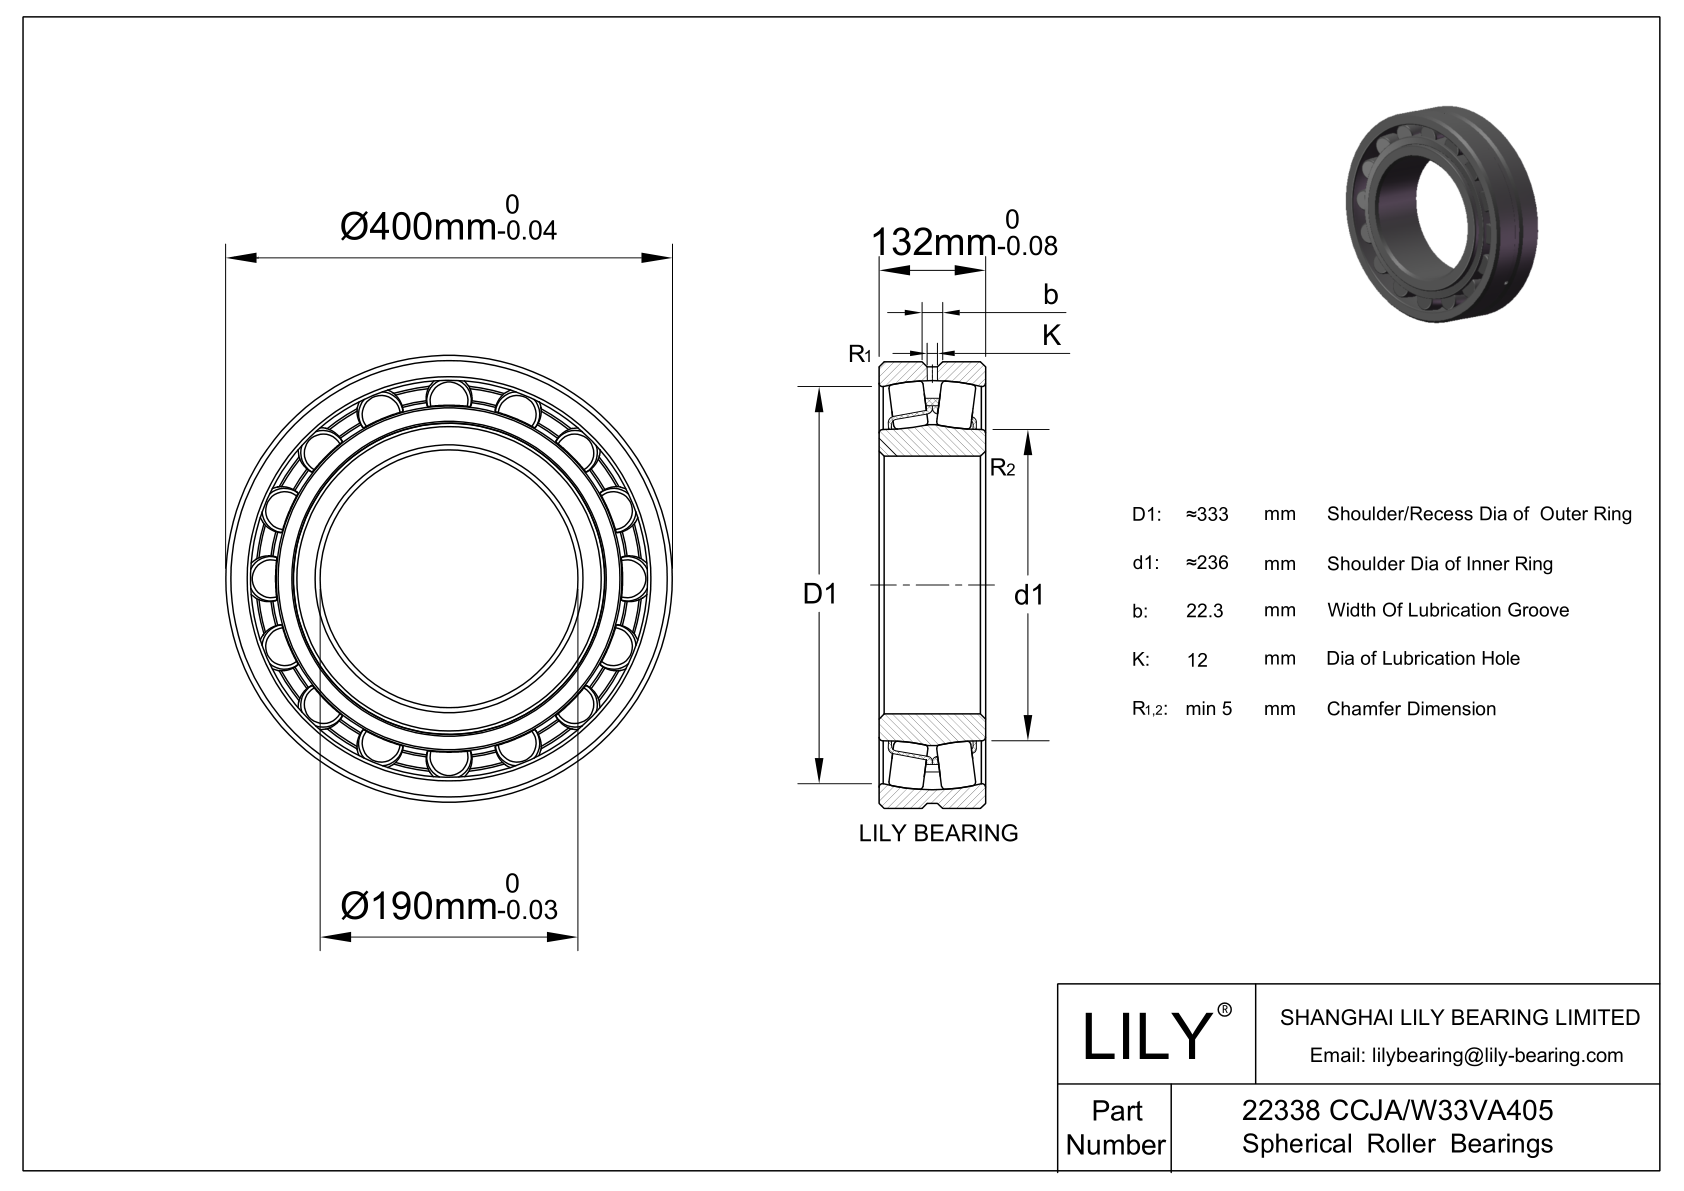 22338 CCJA/W33VA405 Double Row Spherical Roller Bearing cad drawing